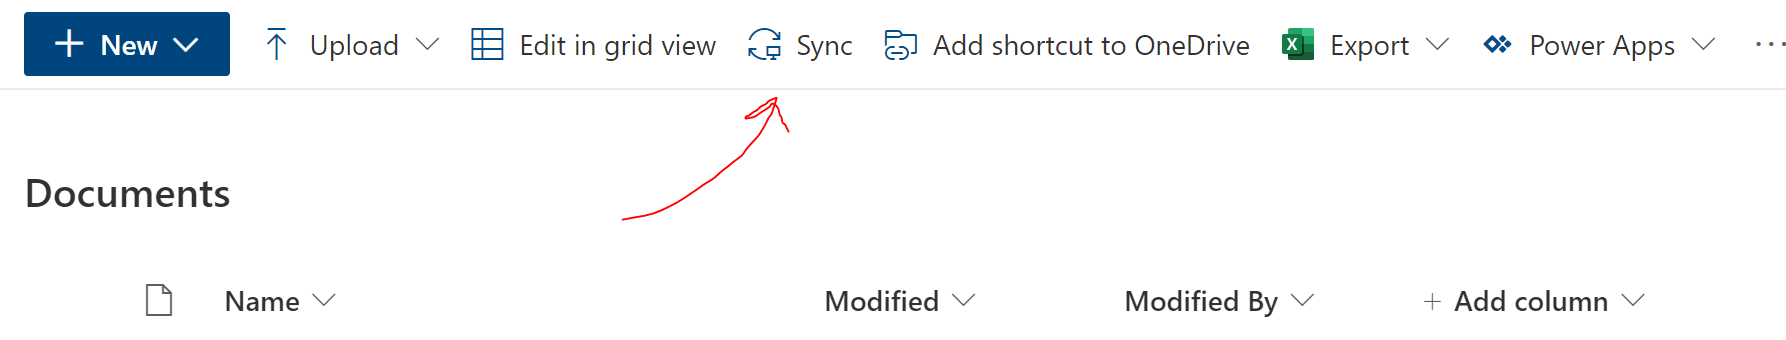 Showing documents in SharePoint online with Sync button highlighted.